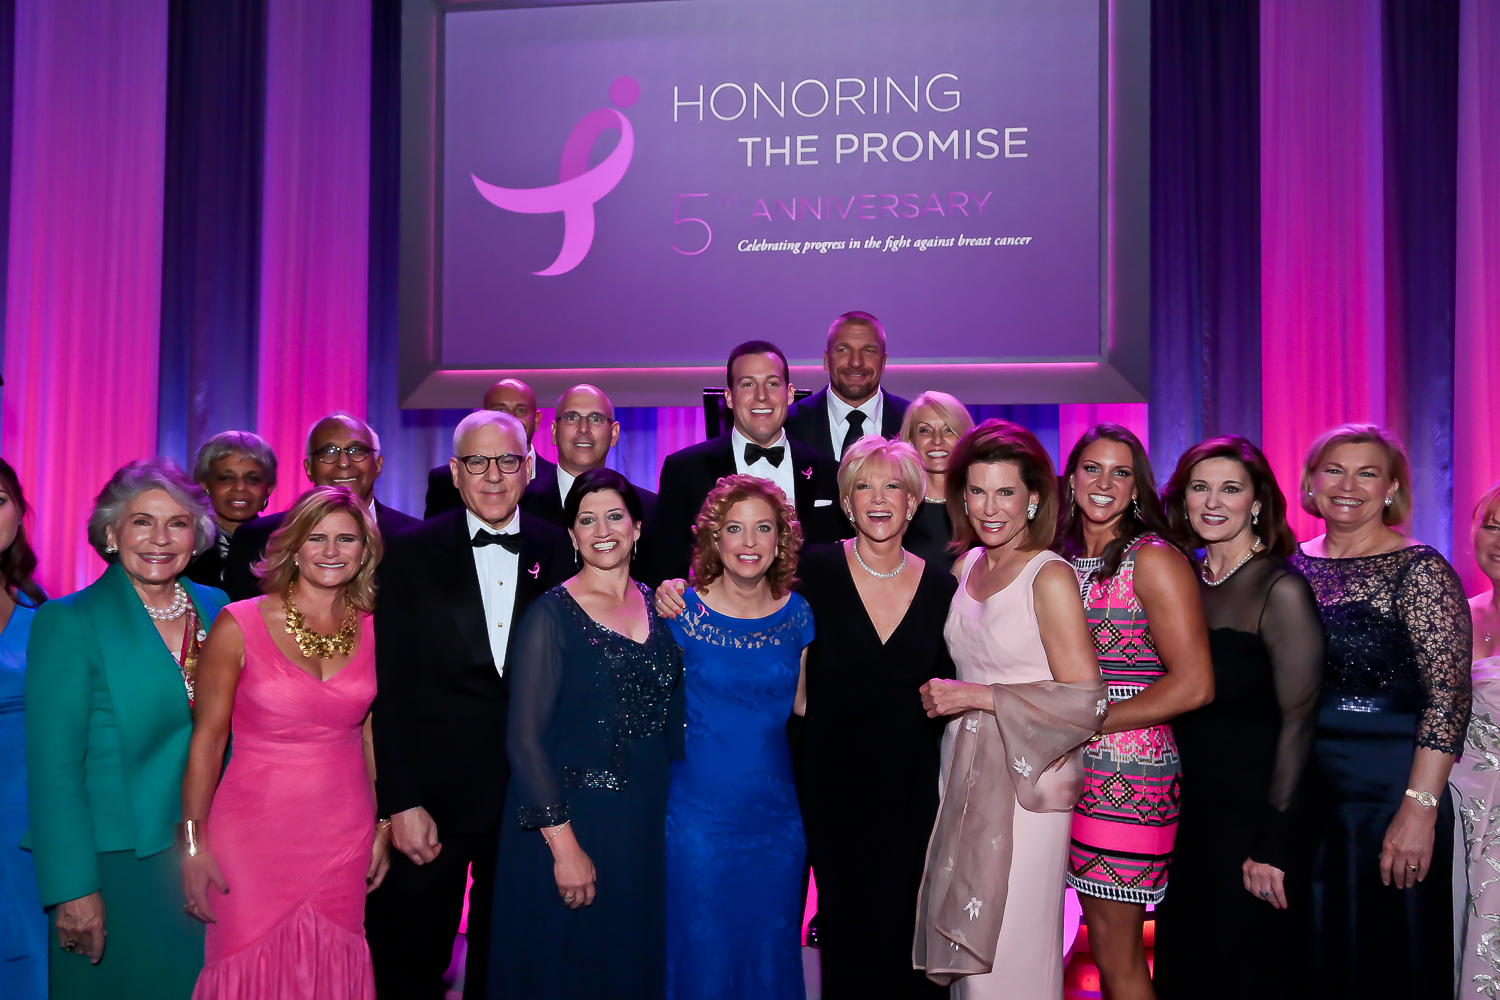 5th Annual Komen Gala Honors the Promise, Shifts Into ‘Warrior Mode’